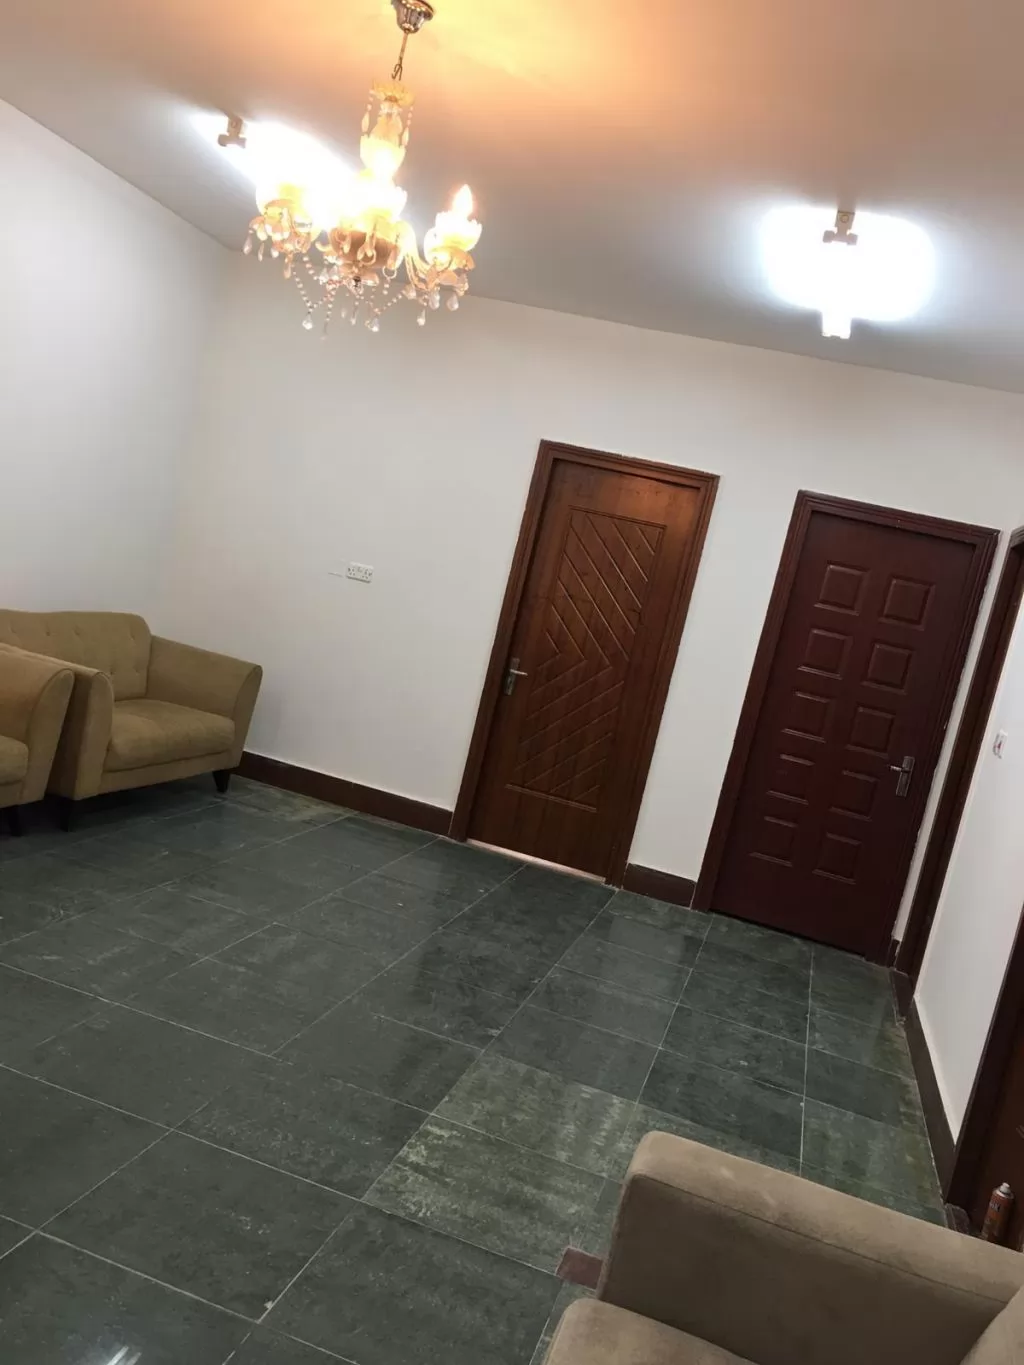 Residential Property 2 Bedrooms F/F Apartment  for rent in Al-Rayyan #13903 - 1  image 